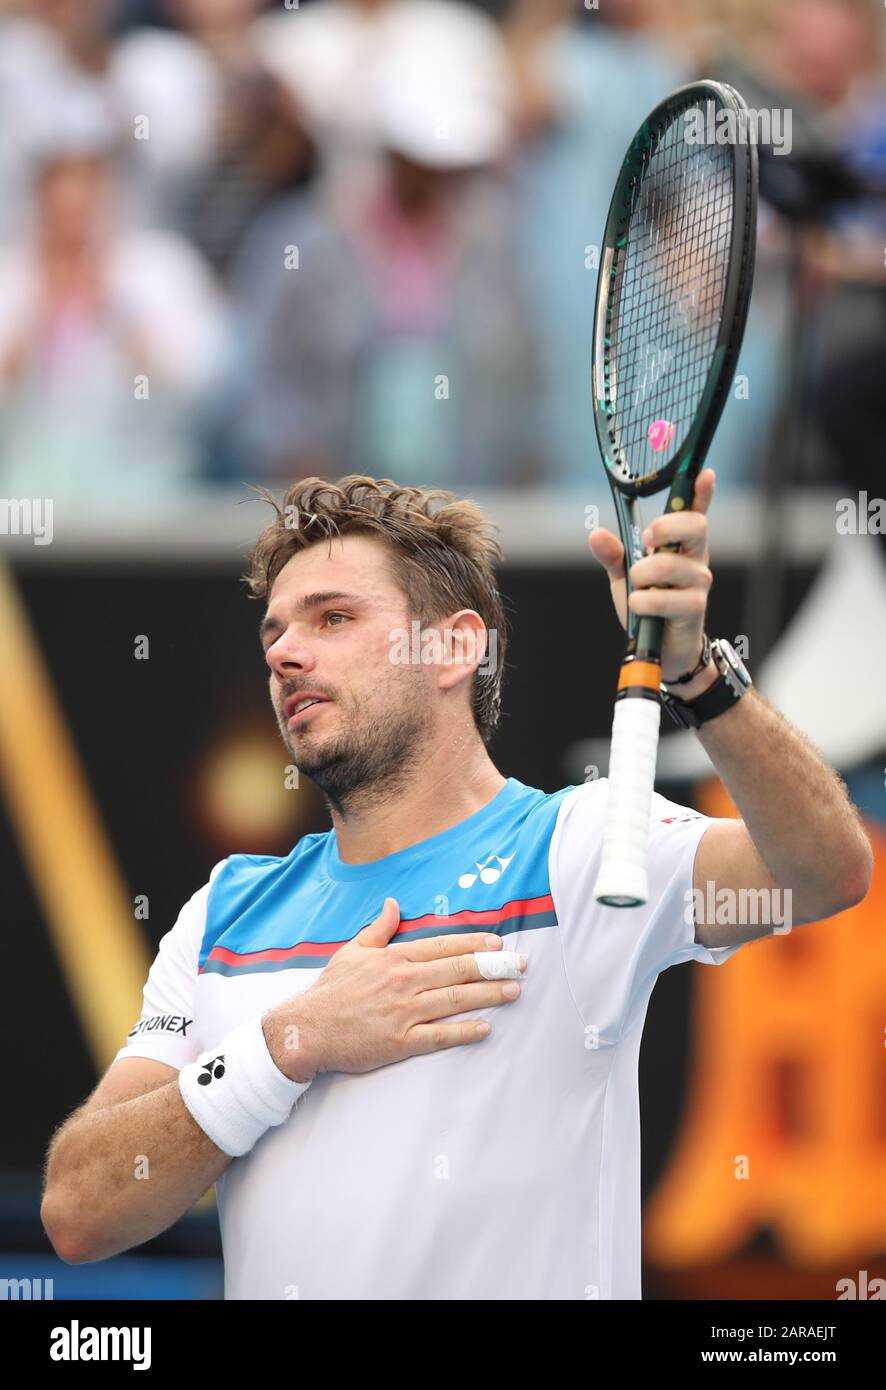 Melbourne, Australia. 27th Jan, 2020. Stan Wawrinka celebrates victory  after the men's single's fourth round match between Stan Wawrinka of  Switzerland and Daniil Medvedev of Russia at the Australian Open tennis  tournament